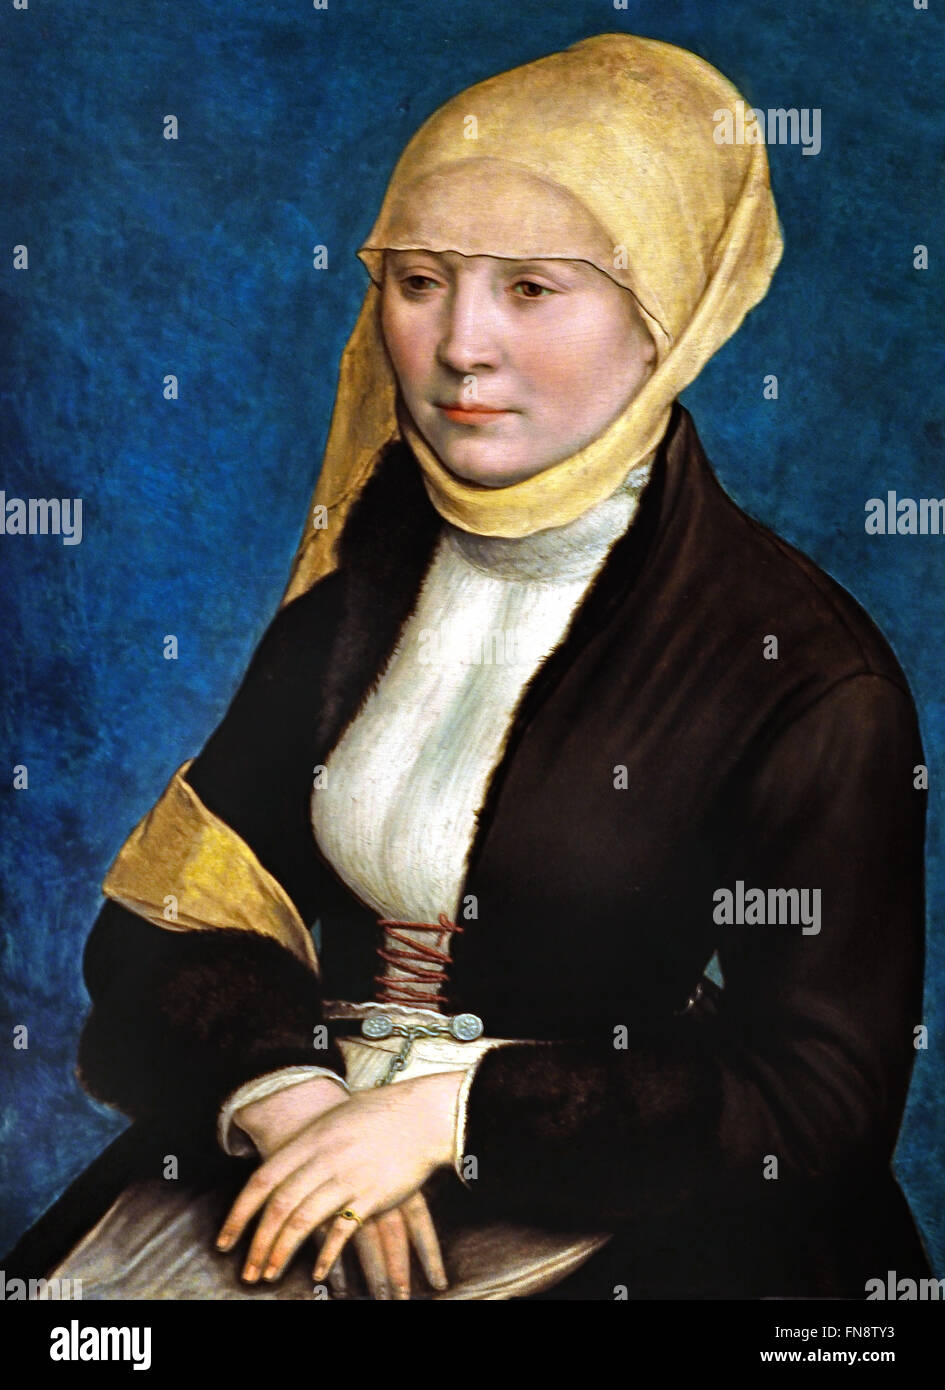 Hans Holbein the Younger Portrait of a Woman from Southern Germany,1520 - 1525 German Germany Stock Photo